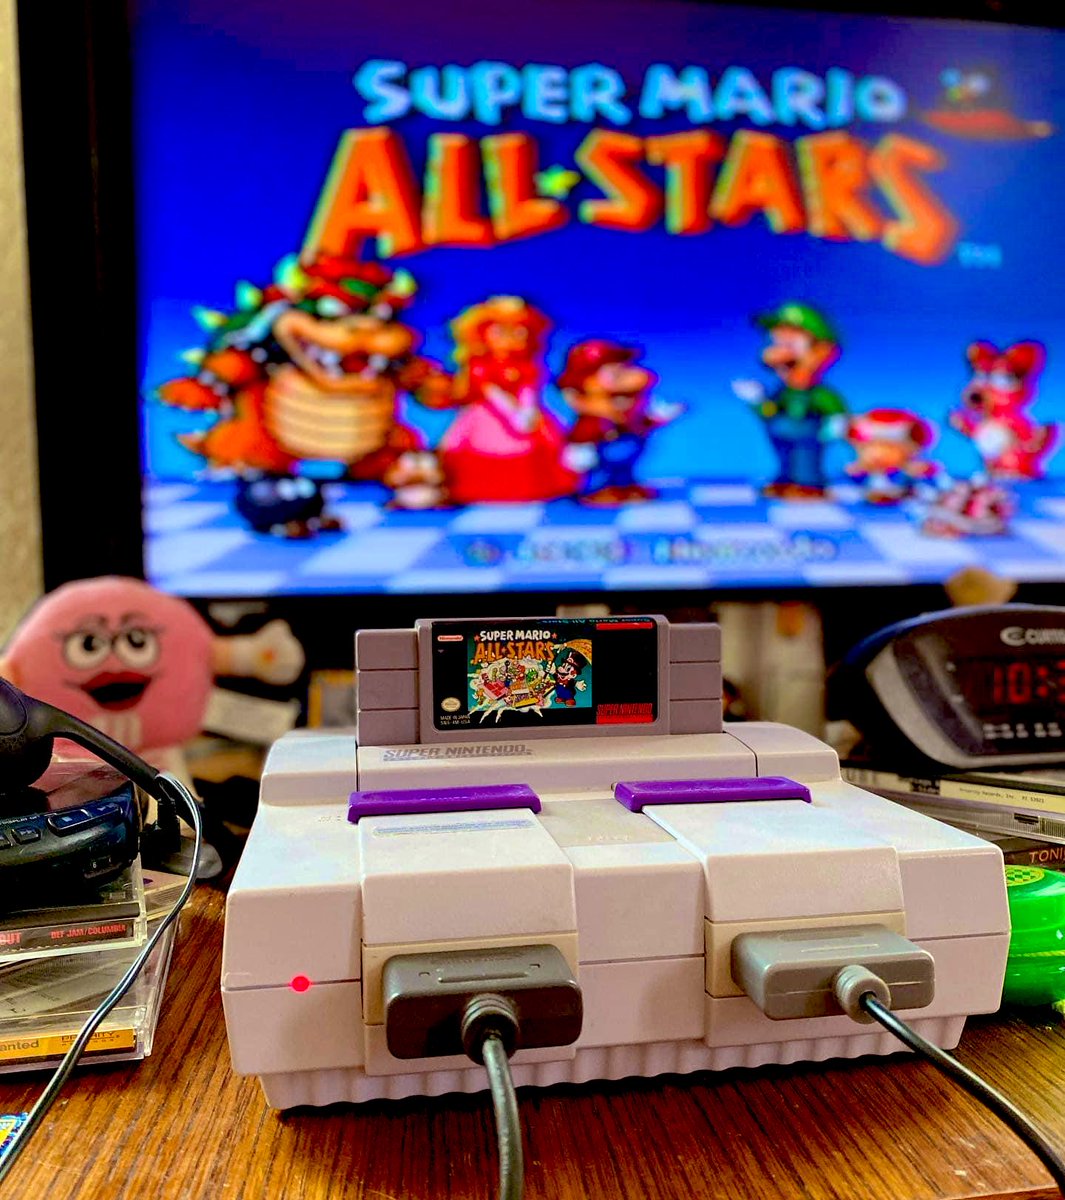 Super Mario All-Stars for the W🌟 
•
What retro video games are you playing today? 🤔 🍄 
•
#supernintendo #sundayfunday #supermarioallstars